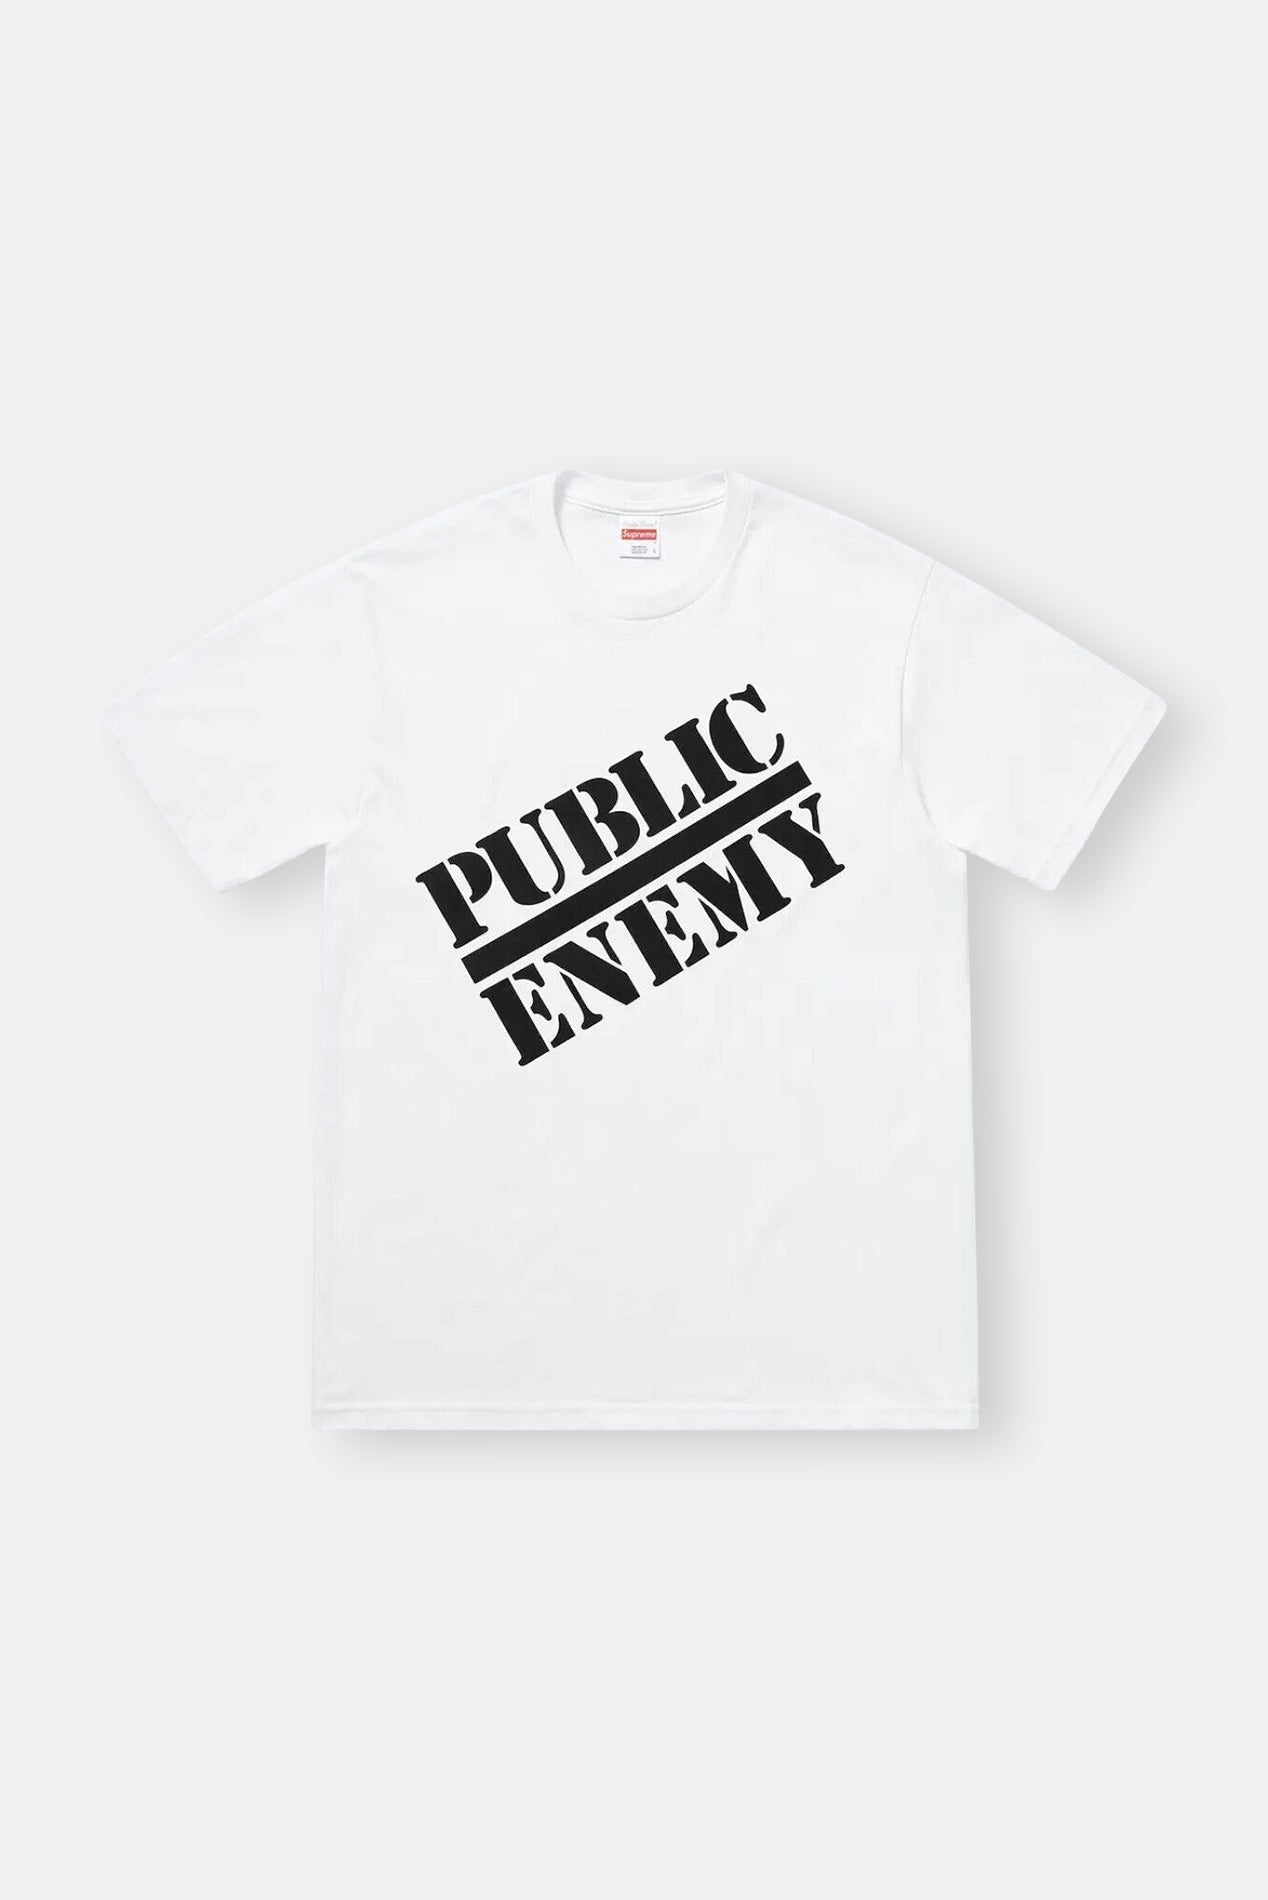 Supreme x Undercover Public Enemy Blow Your Mind Tee White ...